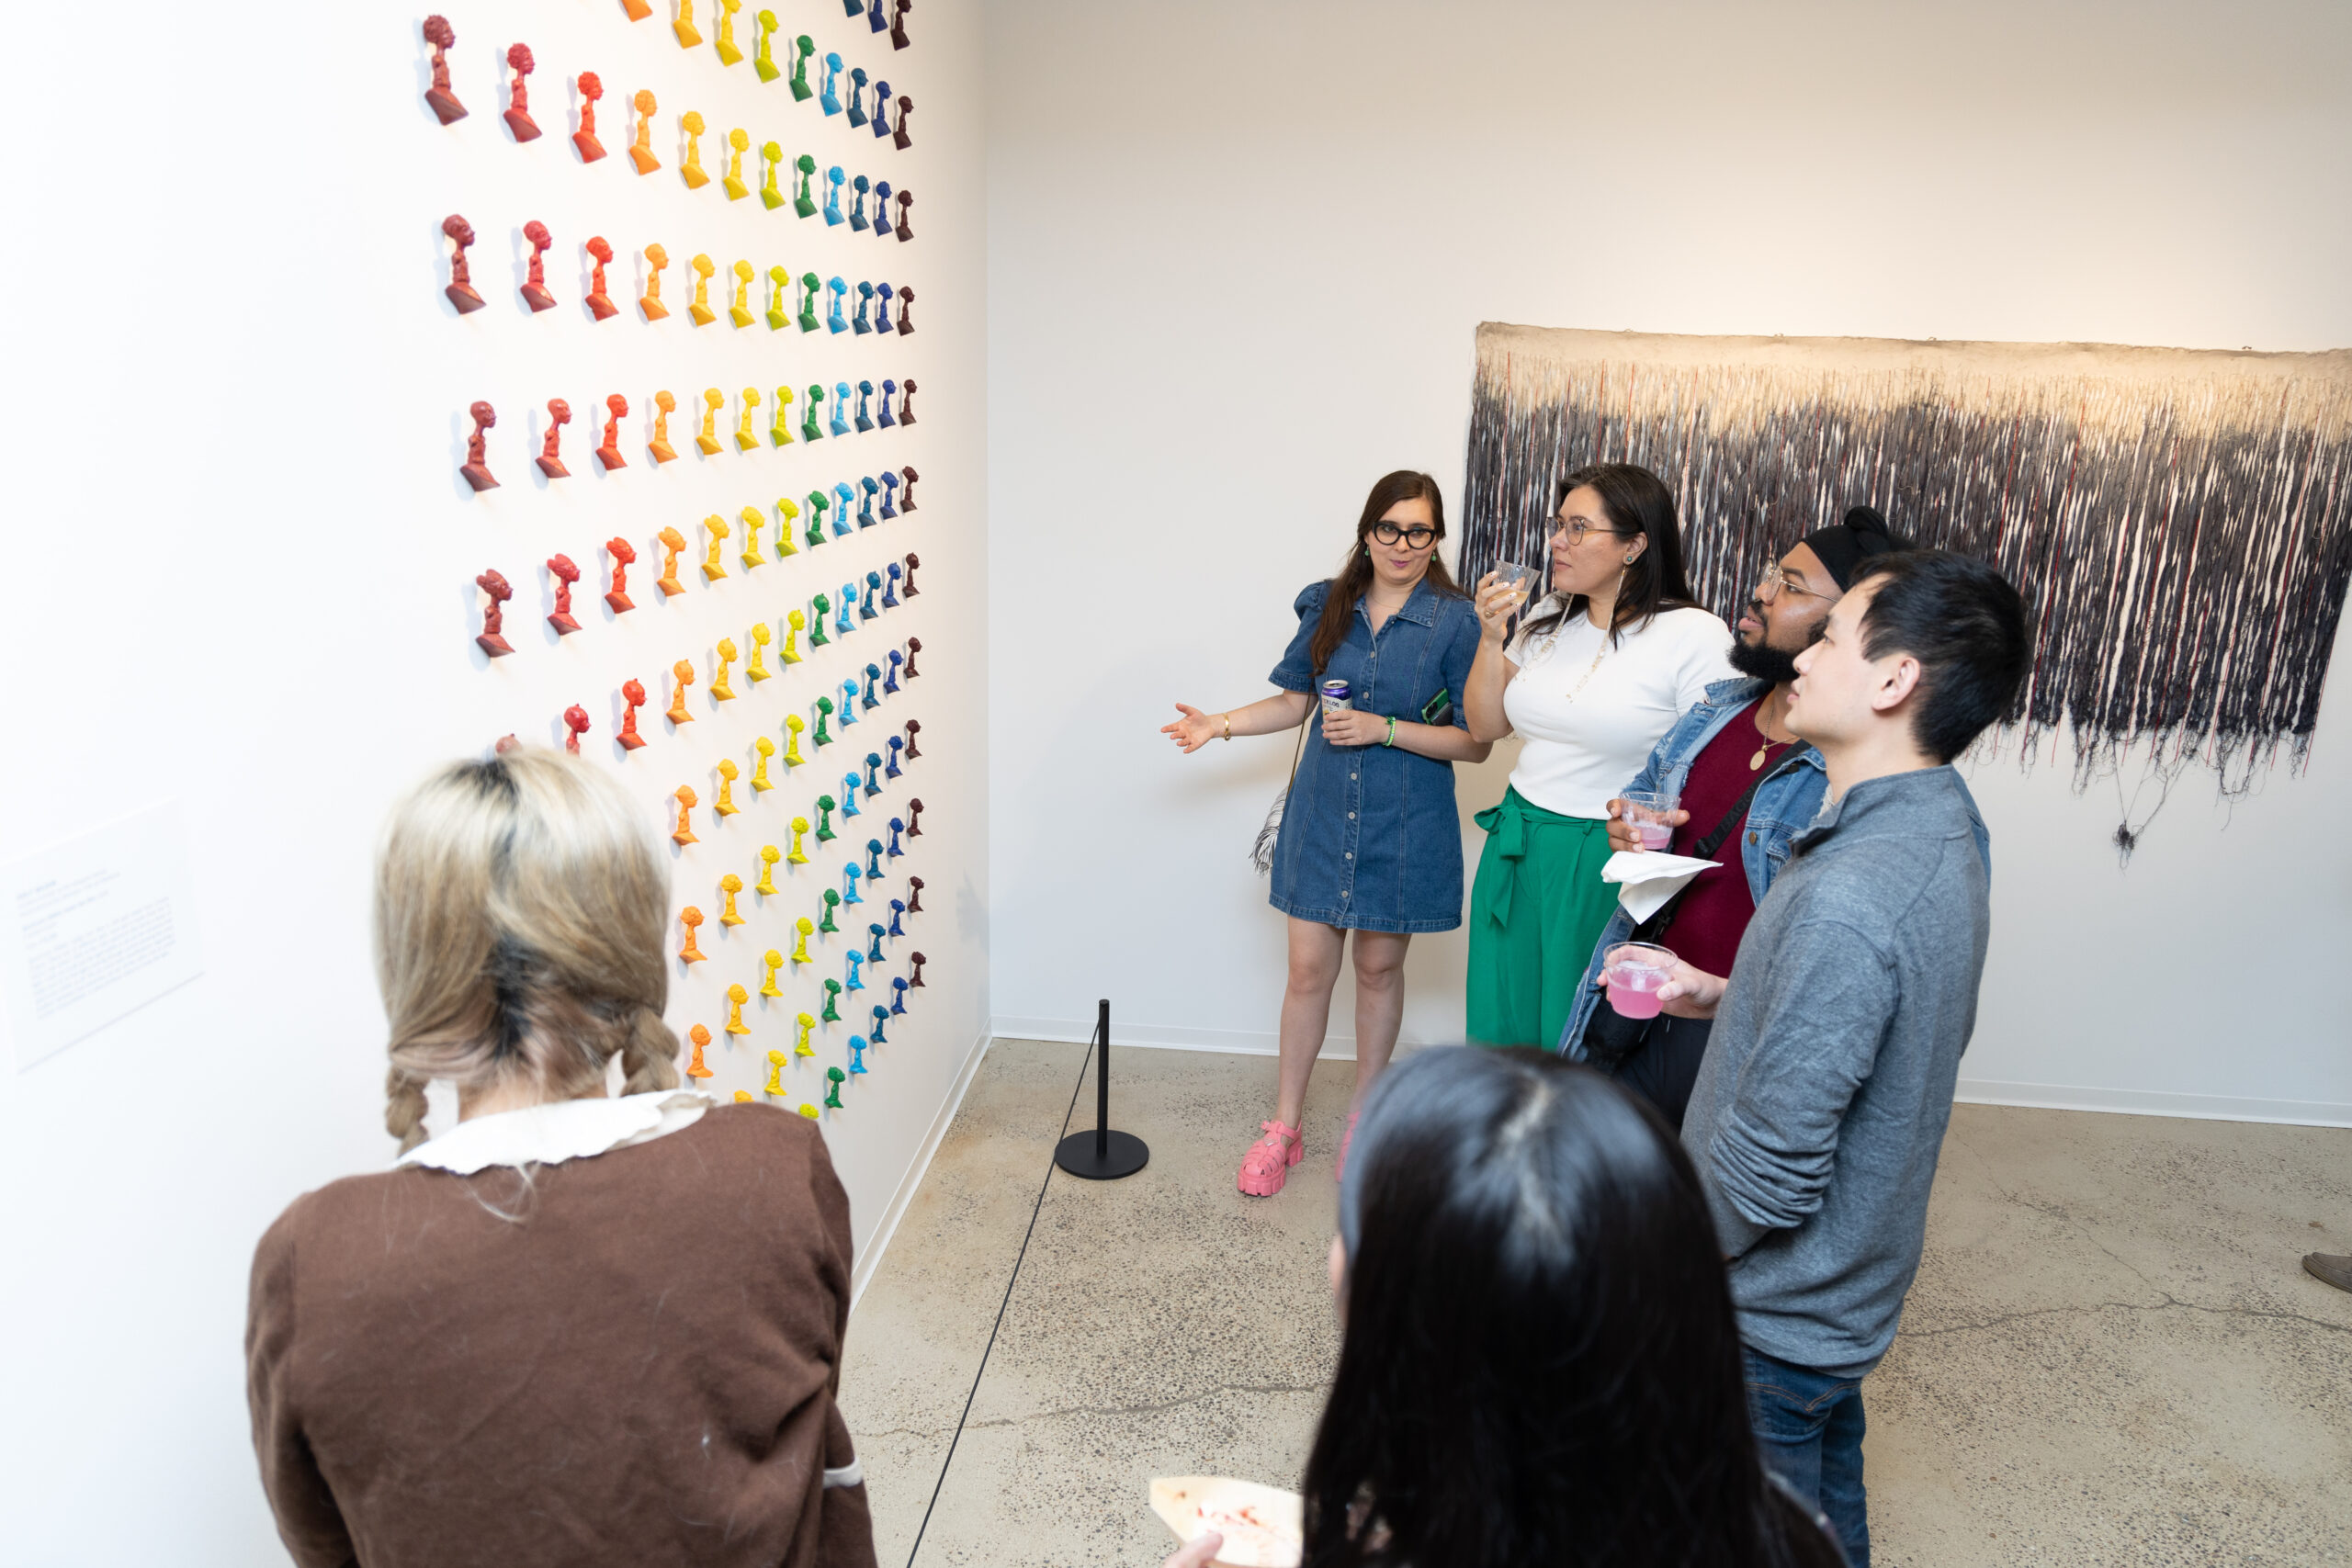 Six individuals stand in from of an artwork made up of small figurines in a rainbow of colors mounted on the gallery wall.